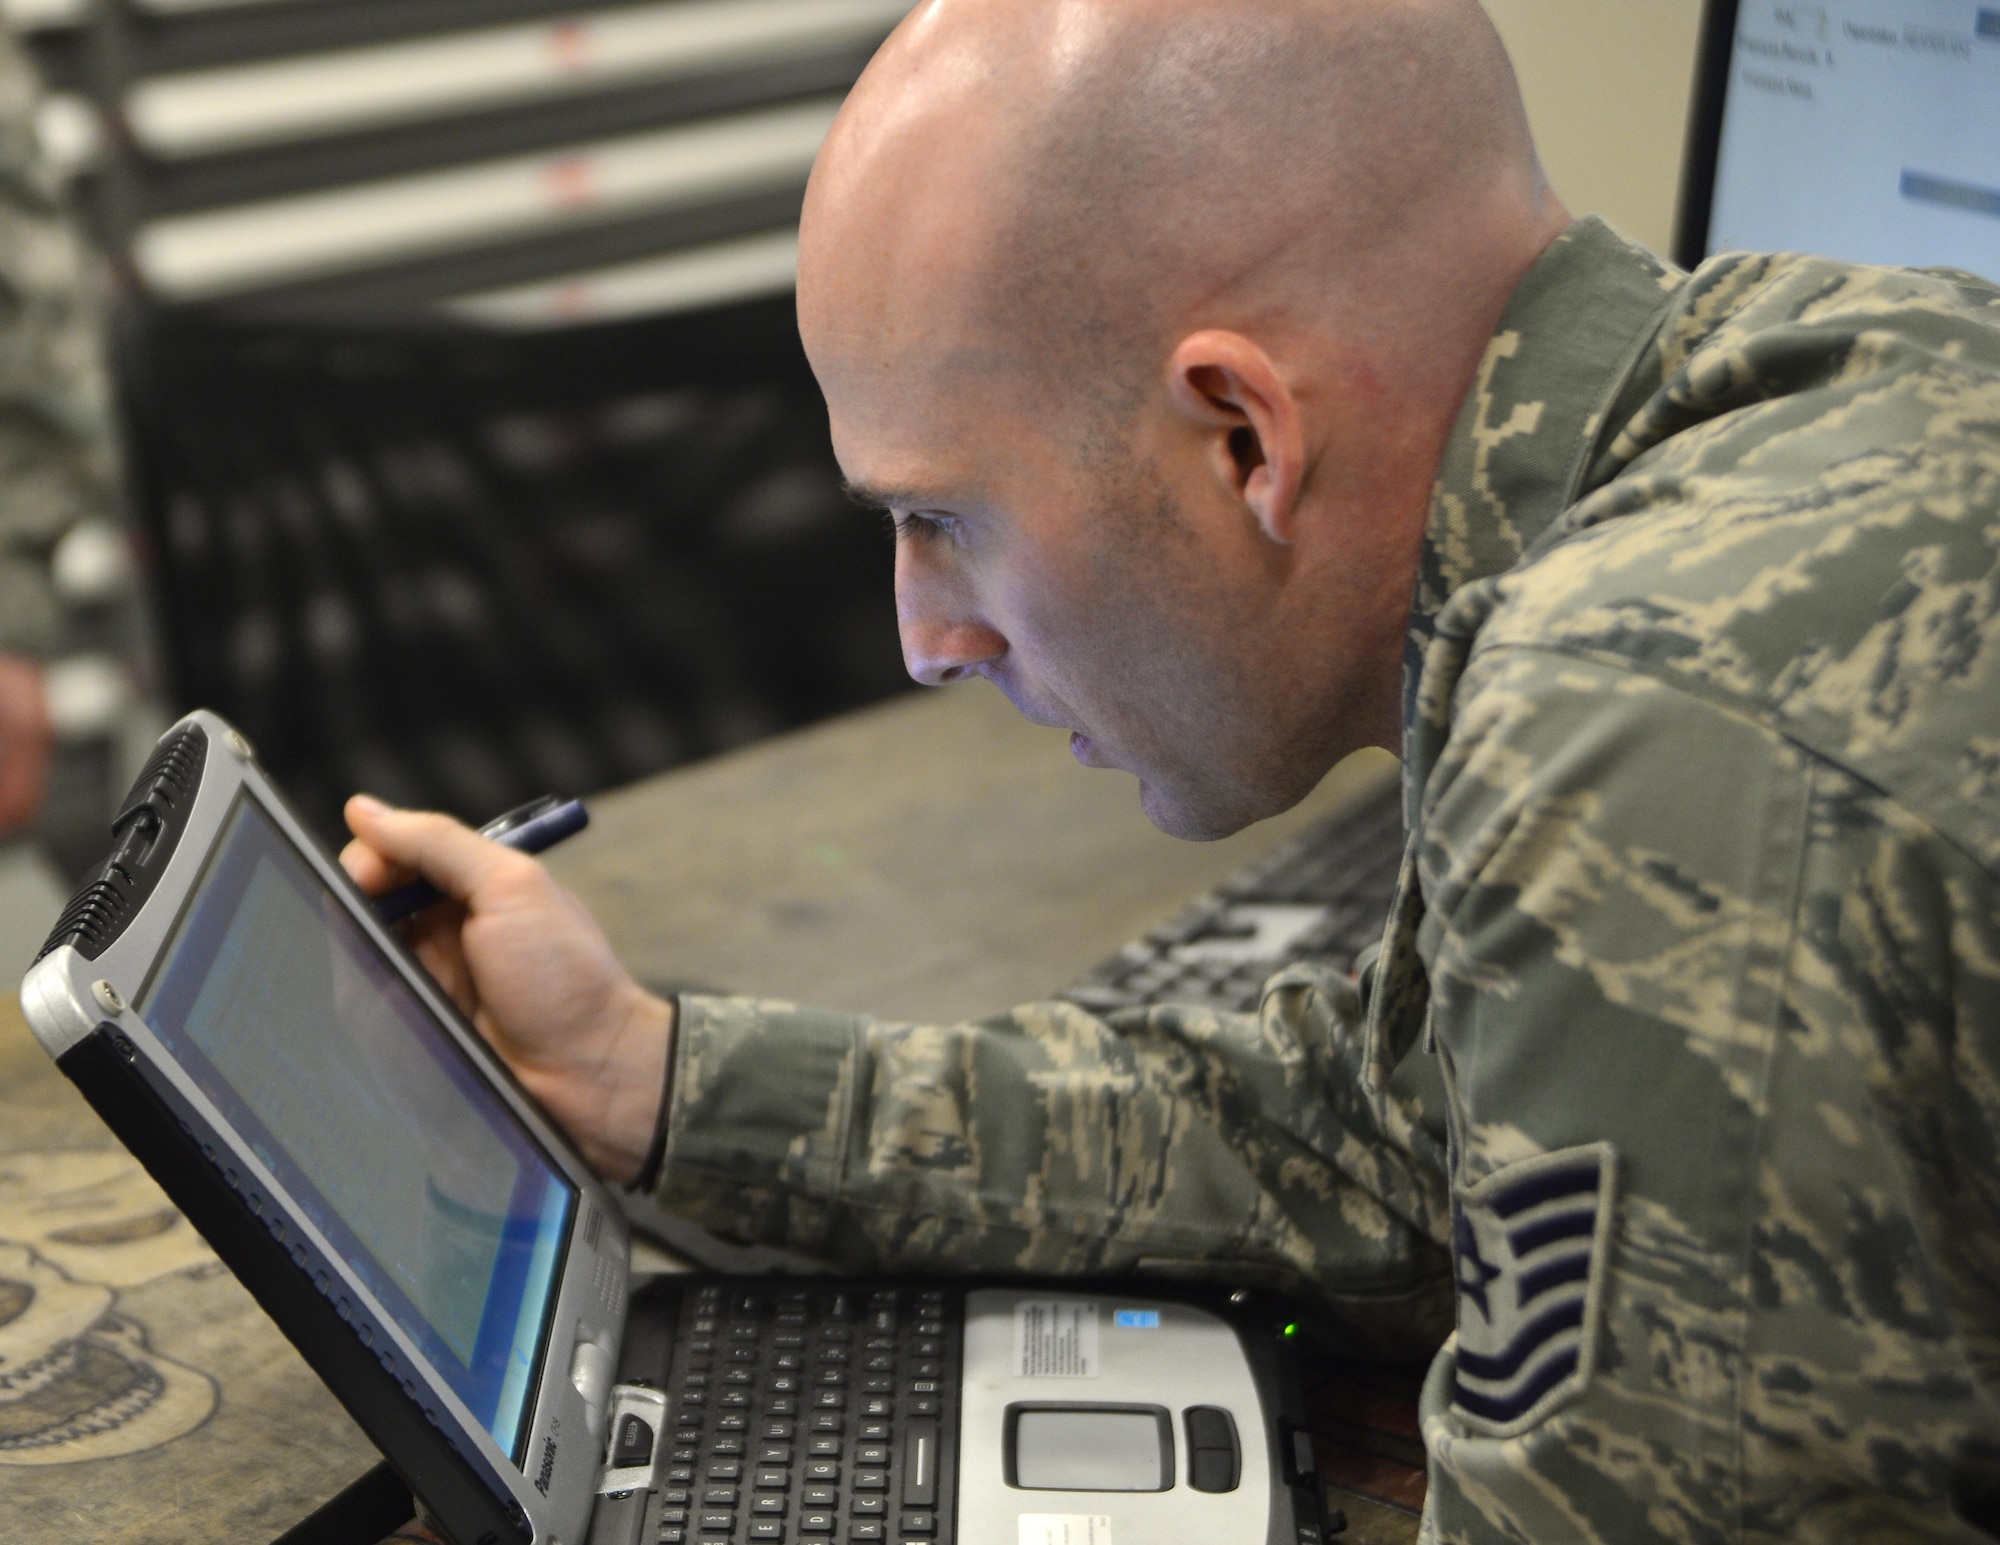 Tech. Sgt. Bryan, 432nd Maintenance Group technical order distribution office, inspects a laptop May 3, 2016, at Creech Air Force Base, Nevada. The quality assurance shop inspects all maintenance including weapons, munitions, support, crew chiefs, avionics, and ground control stations. (U.S. Air Force photo by Senior Airman Christian Clausen/Released)